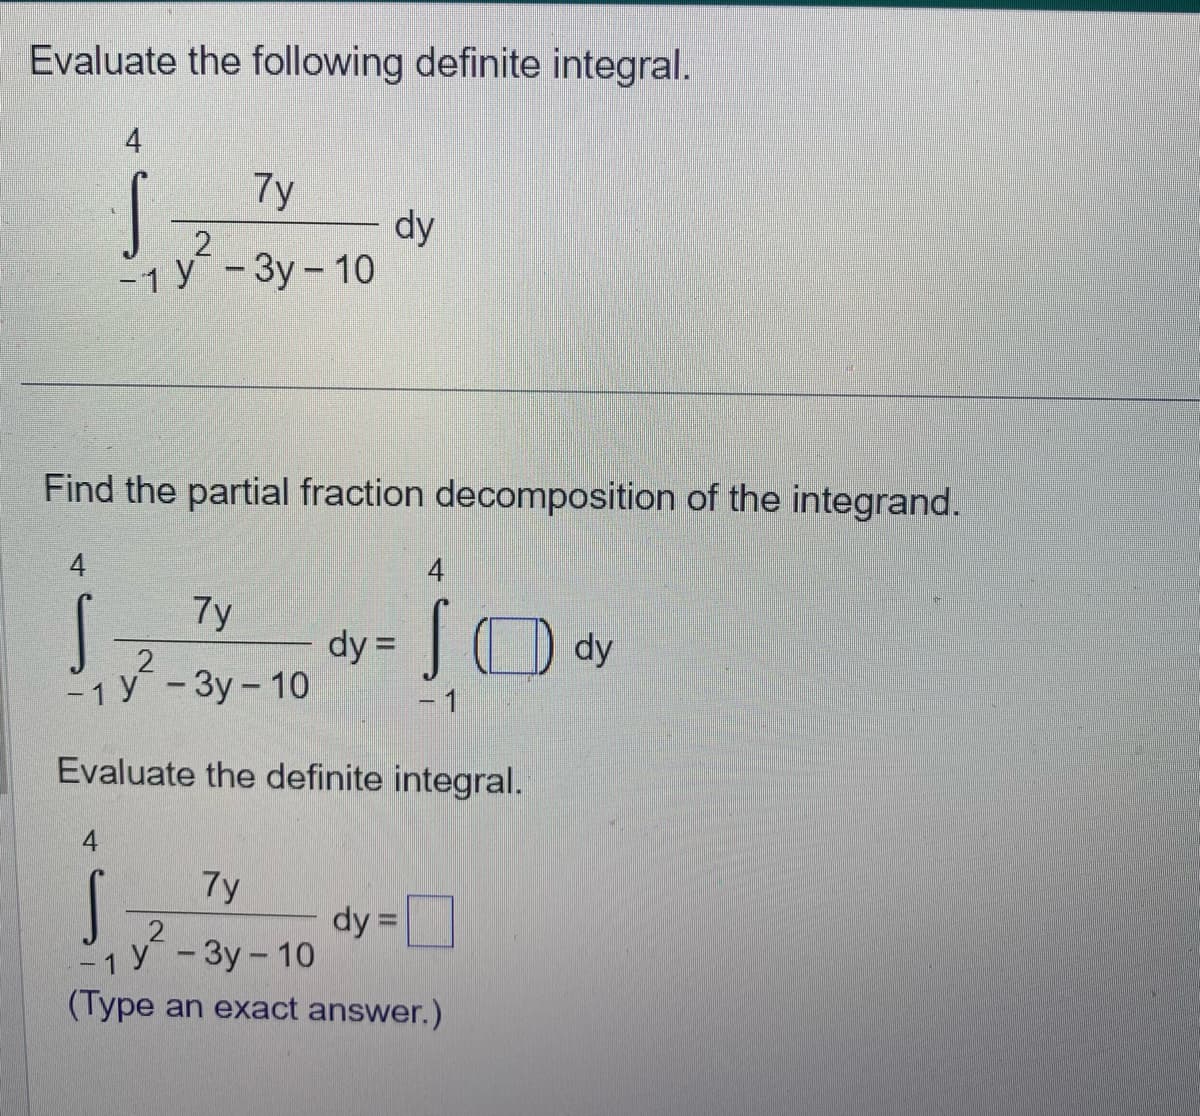 Evaluate the following definite integral.
j...
7y
S
dy
2
-1 Y-3y-10
4
Find the partial fraction decomposition of the integrand.
4
S dy =
7y
-₁ y²-3y-10
-1
Evaluate the definite integral.
4
SO dy
- 1
4
7y
S
dy =
- 1 Y-3y-10
(Type an exact answer.)